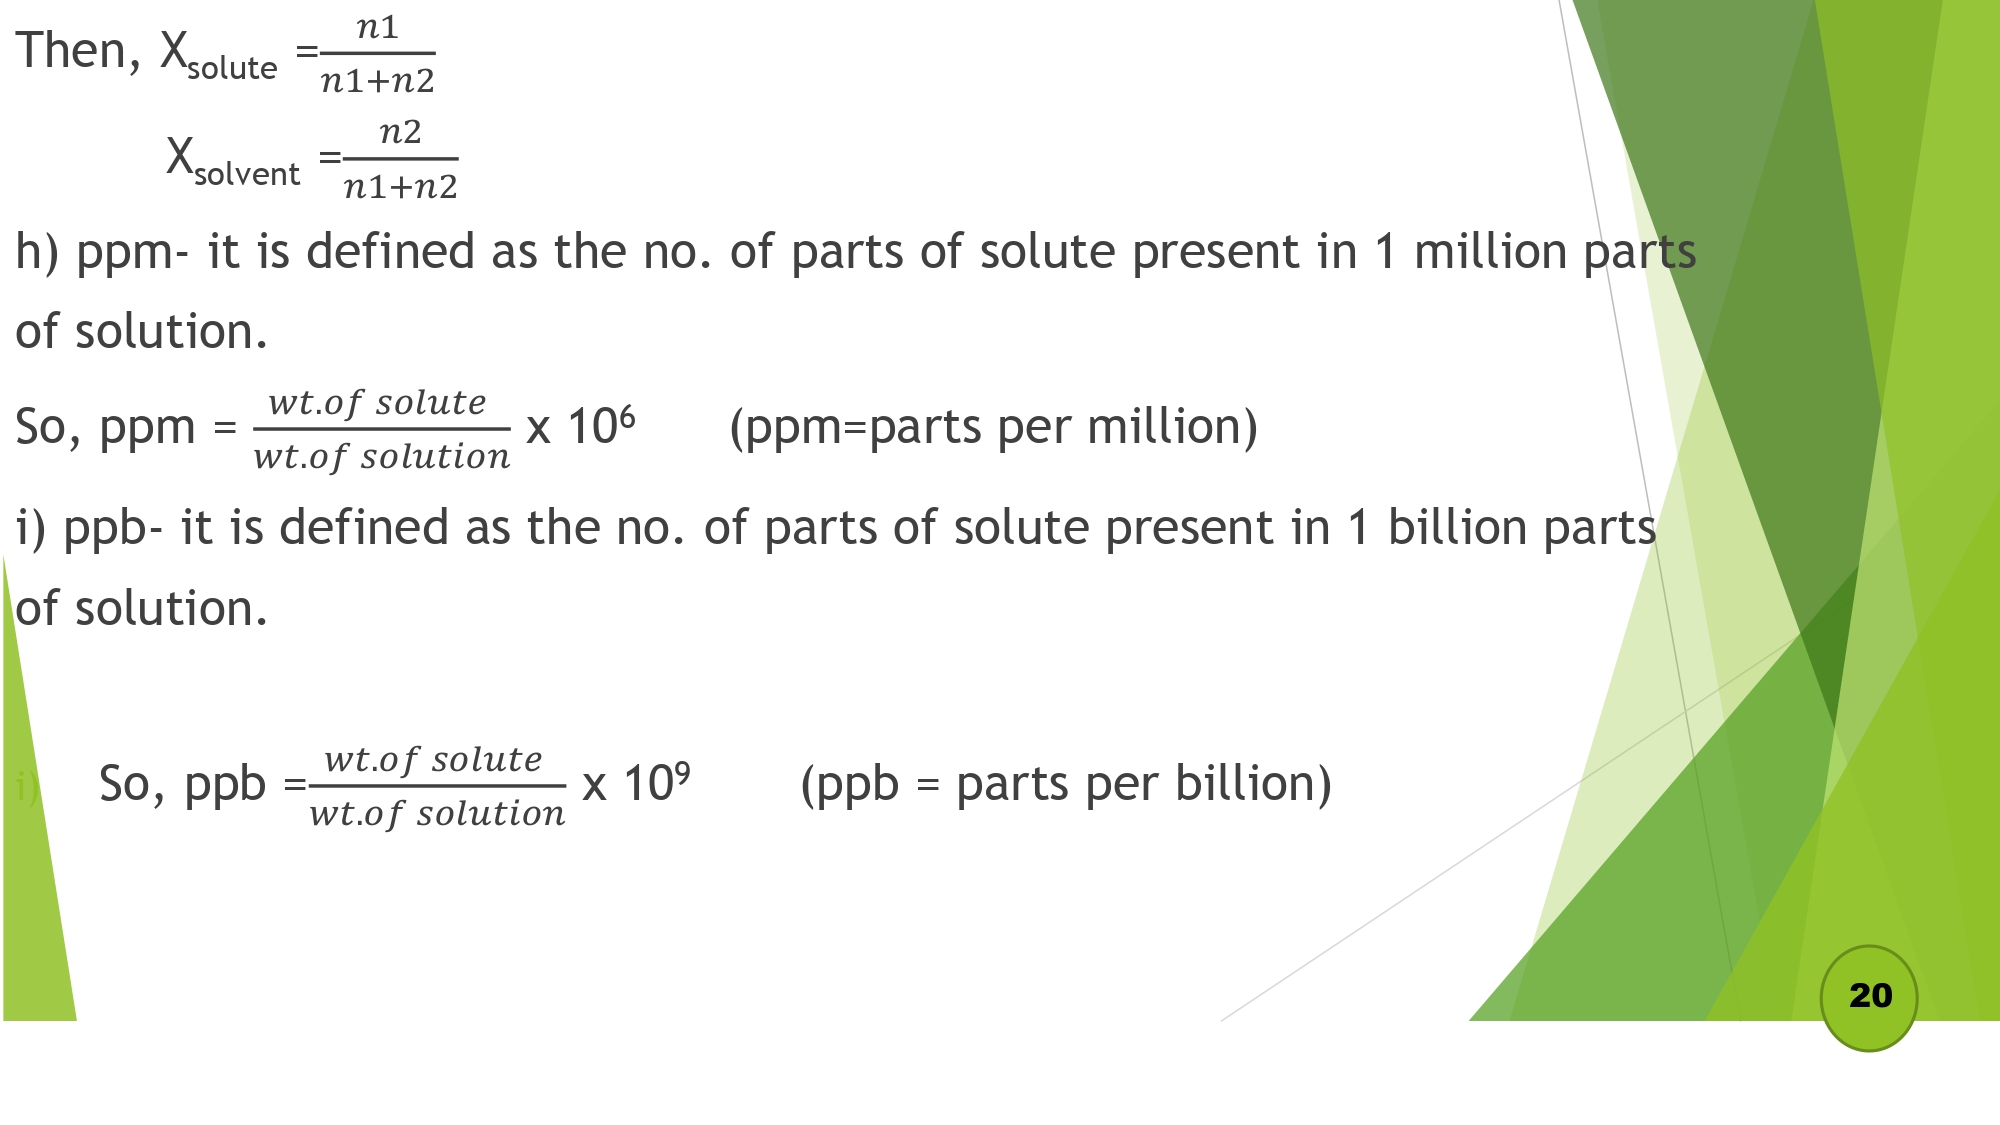 g) Mole fraction: It is the ratio of the no. of moles of solute or solvent and total moles in solution.